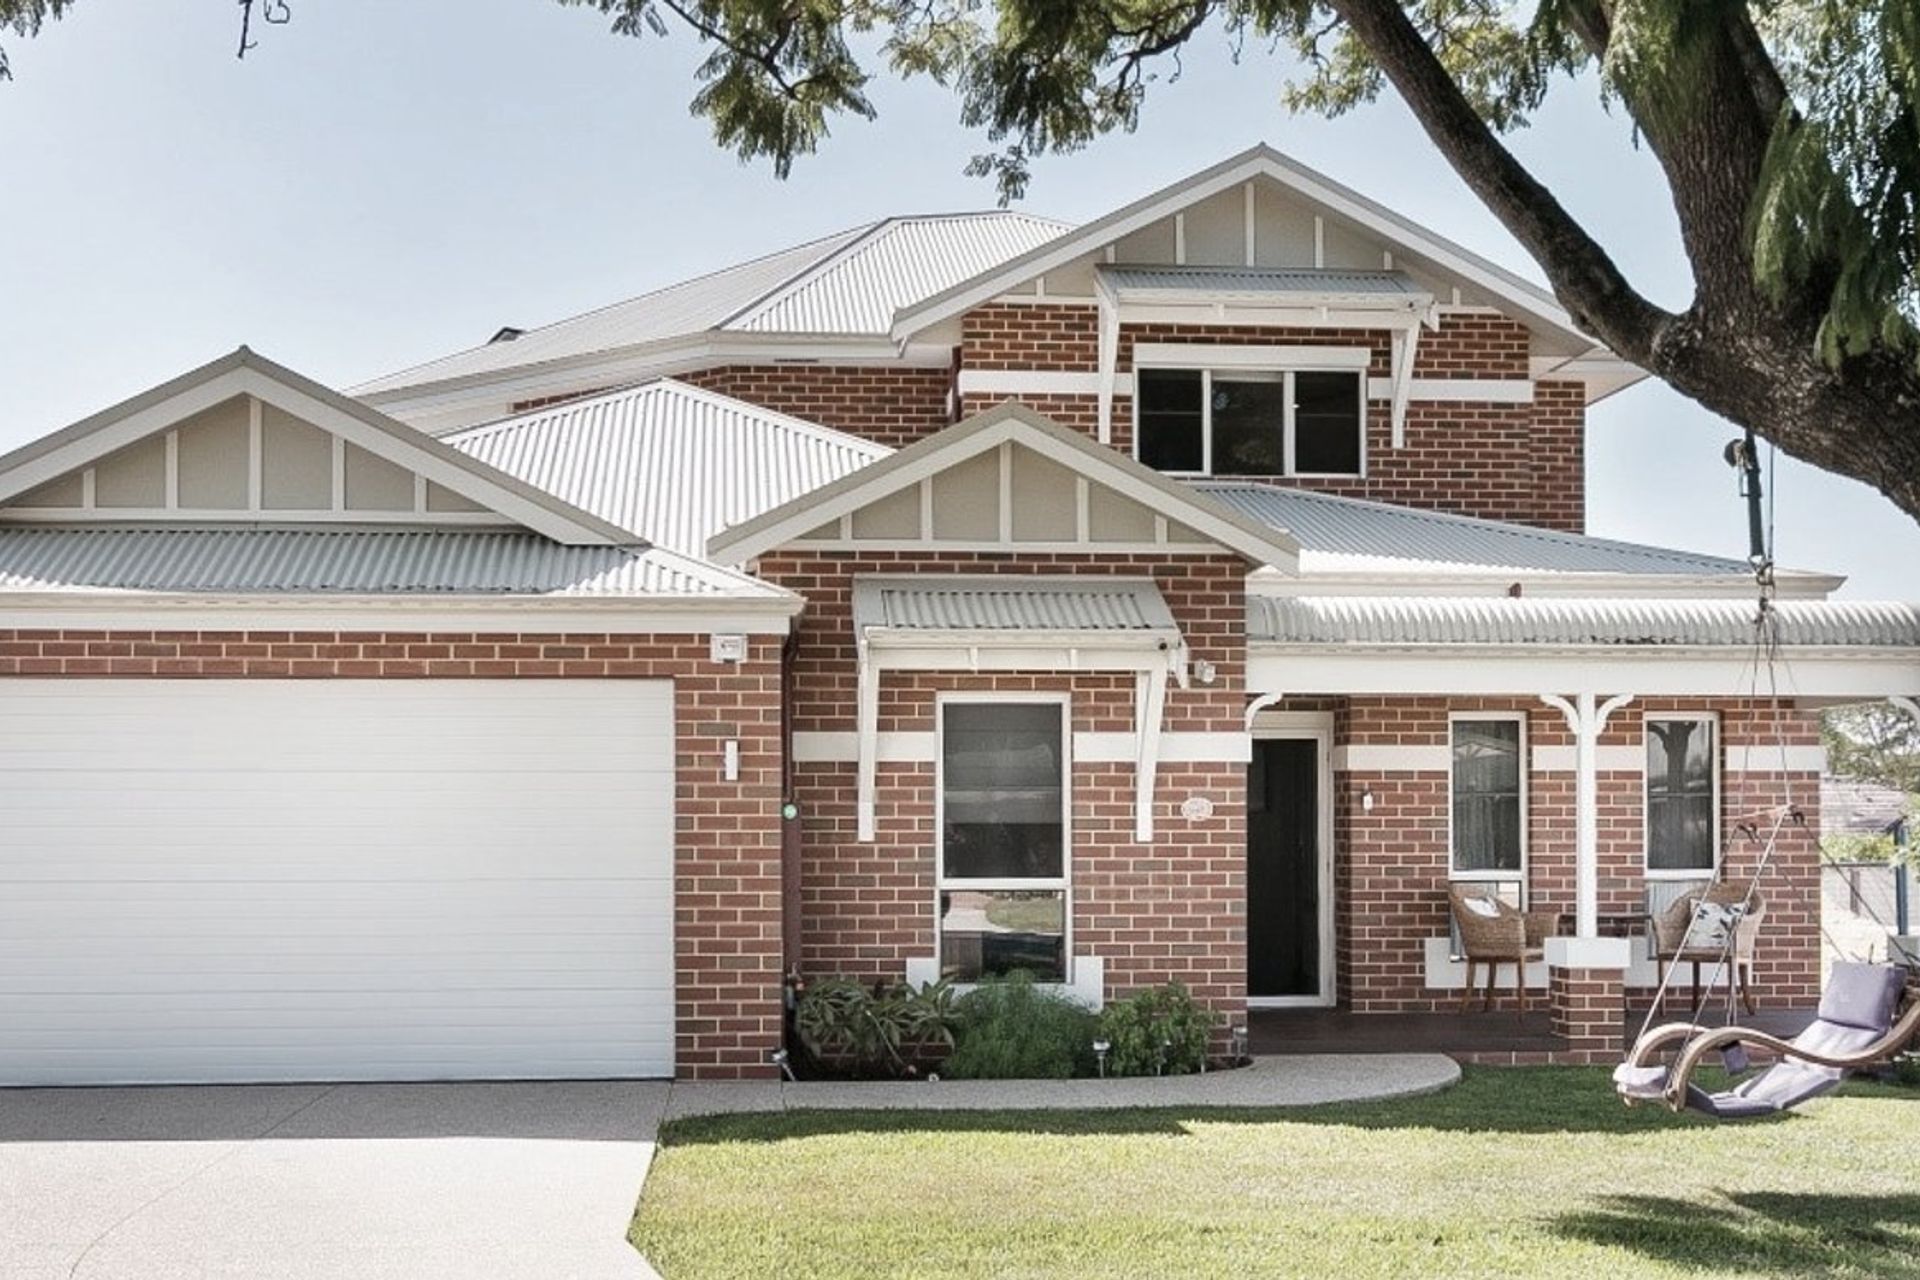 A sectional garage door complements the home's exteriors white trims.